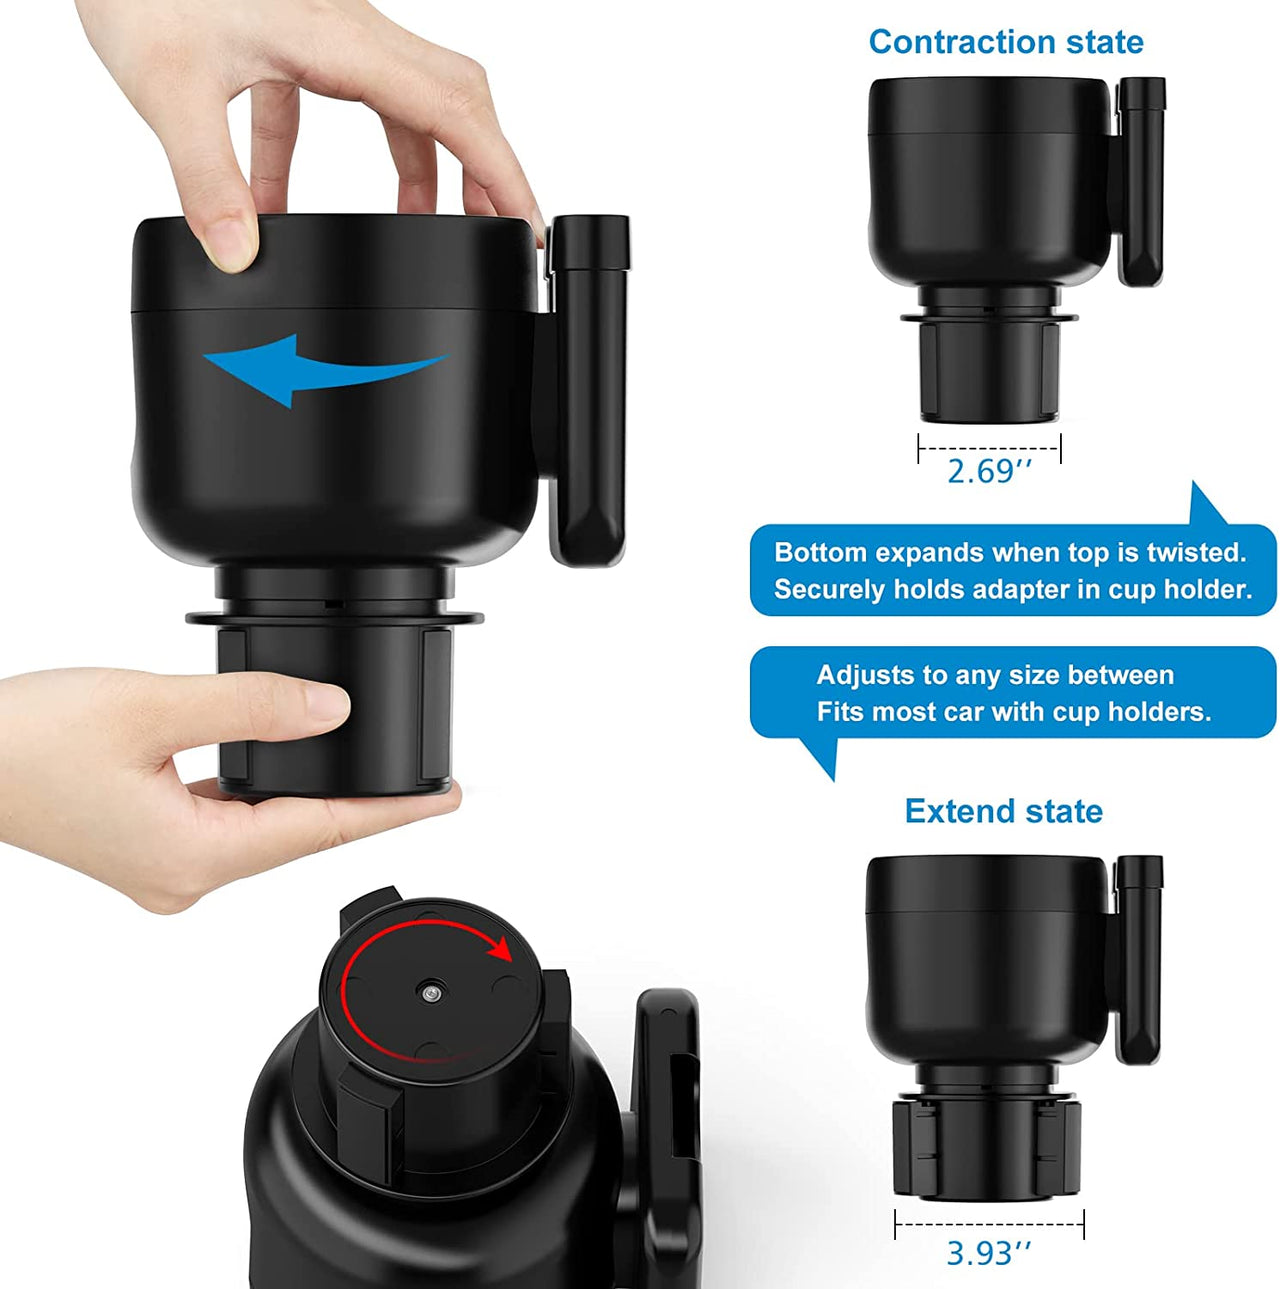 Car Cup Holder 2-in-1, Custom-Fit For Car, Car Cup Holder Expander Adapter with Adjustable Base, Car Cup Holder Expander Organizer with Phone Holder WASA233